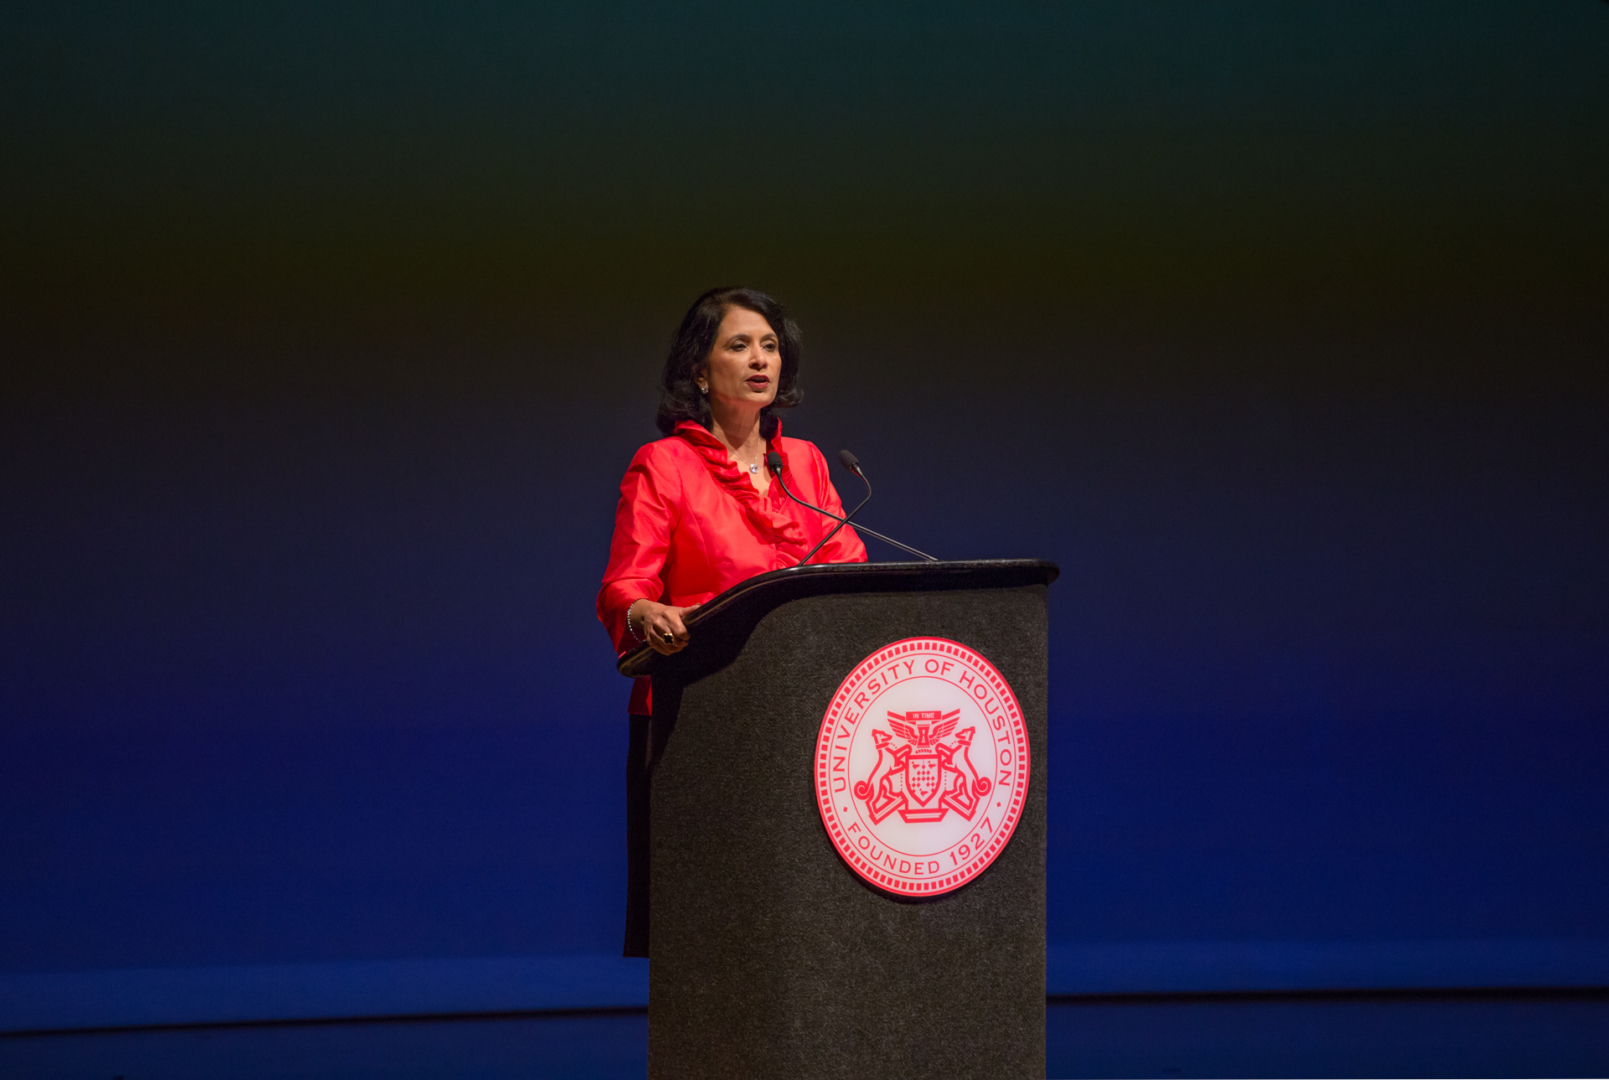 Although not official, President Renu Khator said classes of 50 or more could move to remote formats for Fall 2020. | Trevor Nolley/The Cougar